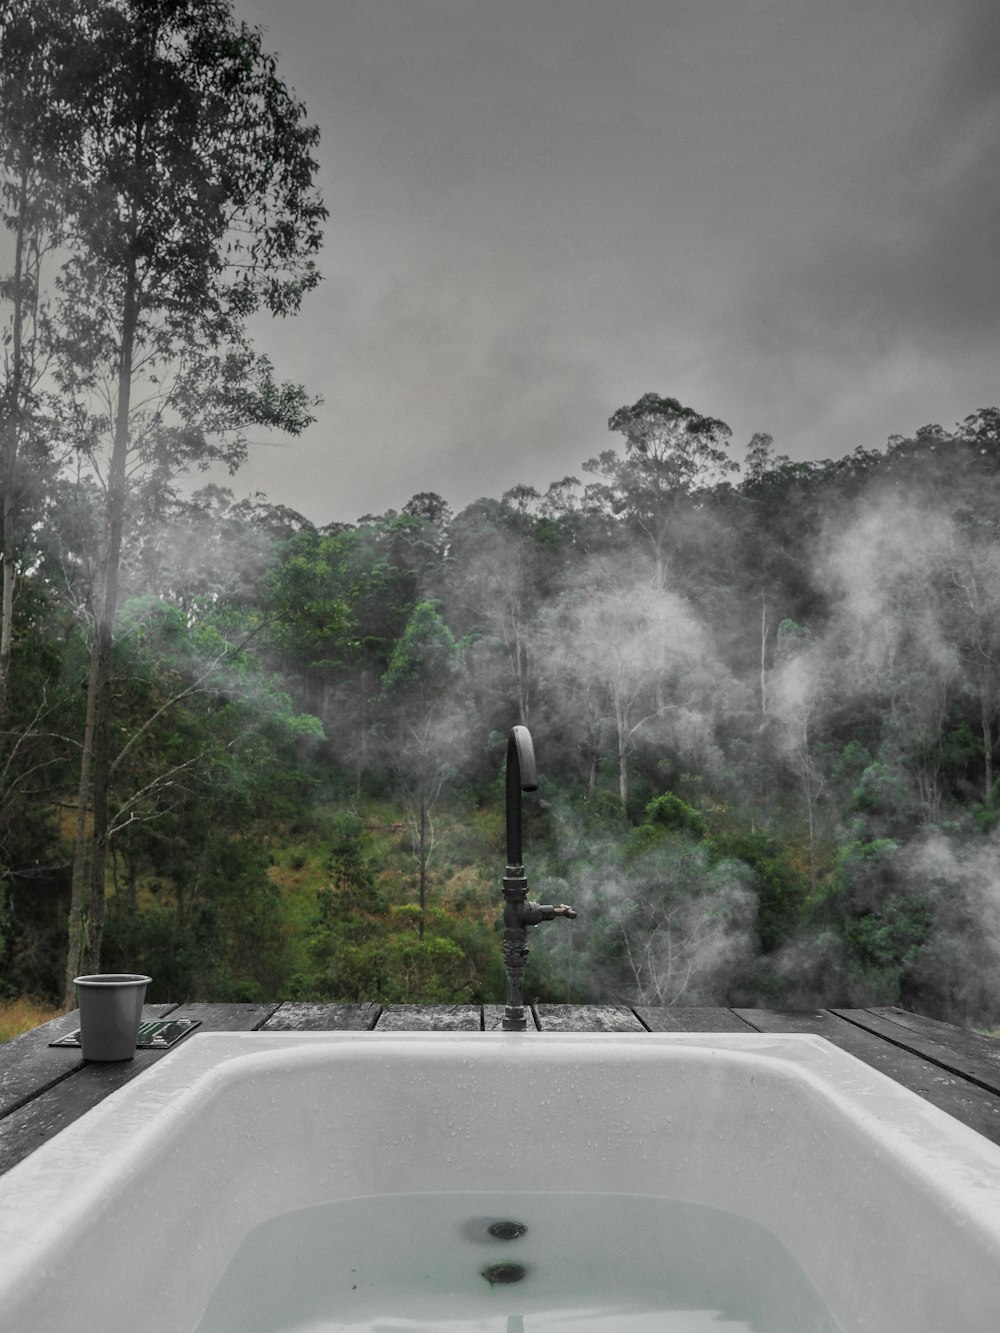 a hot tub sitting on top of a wooden deck